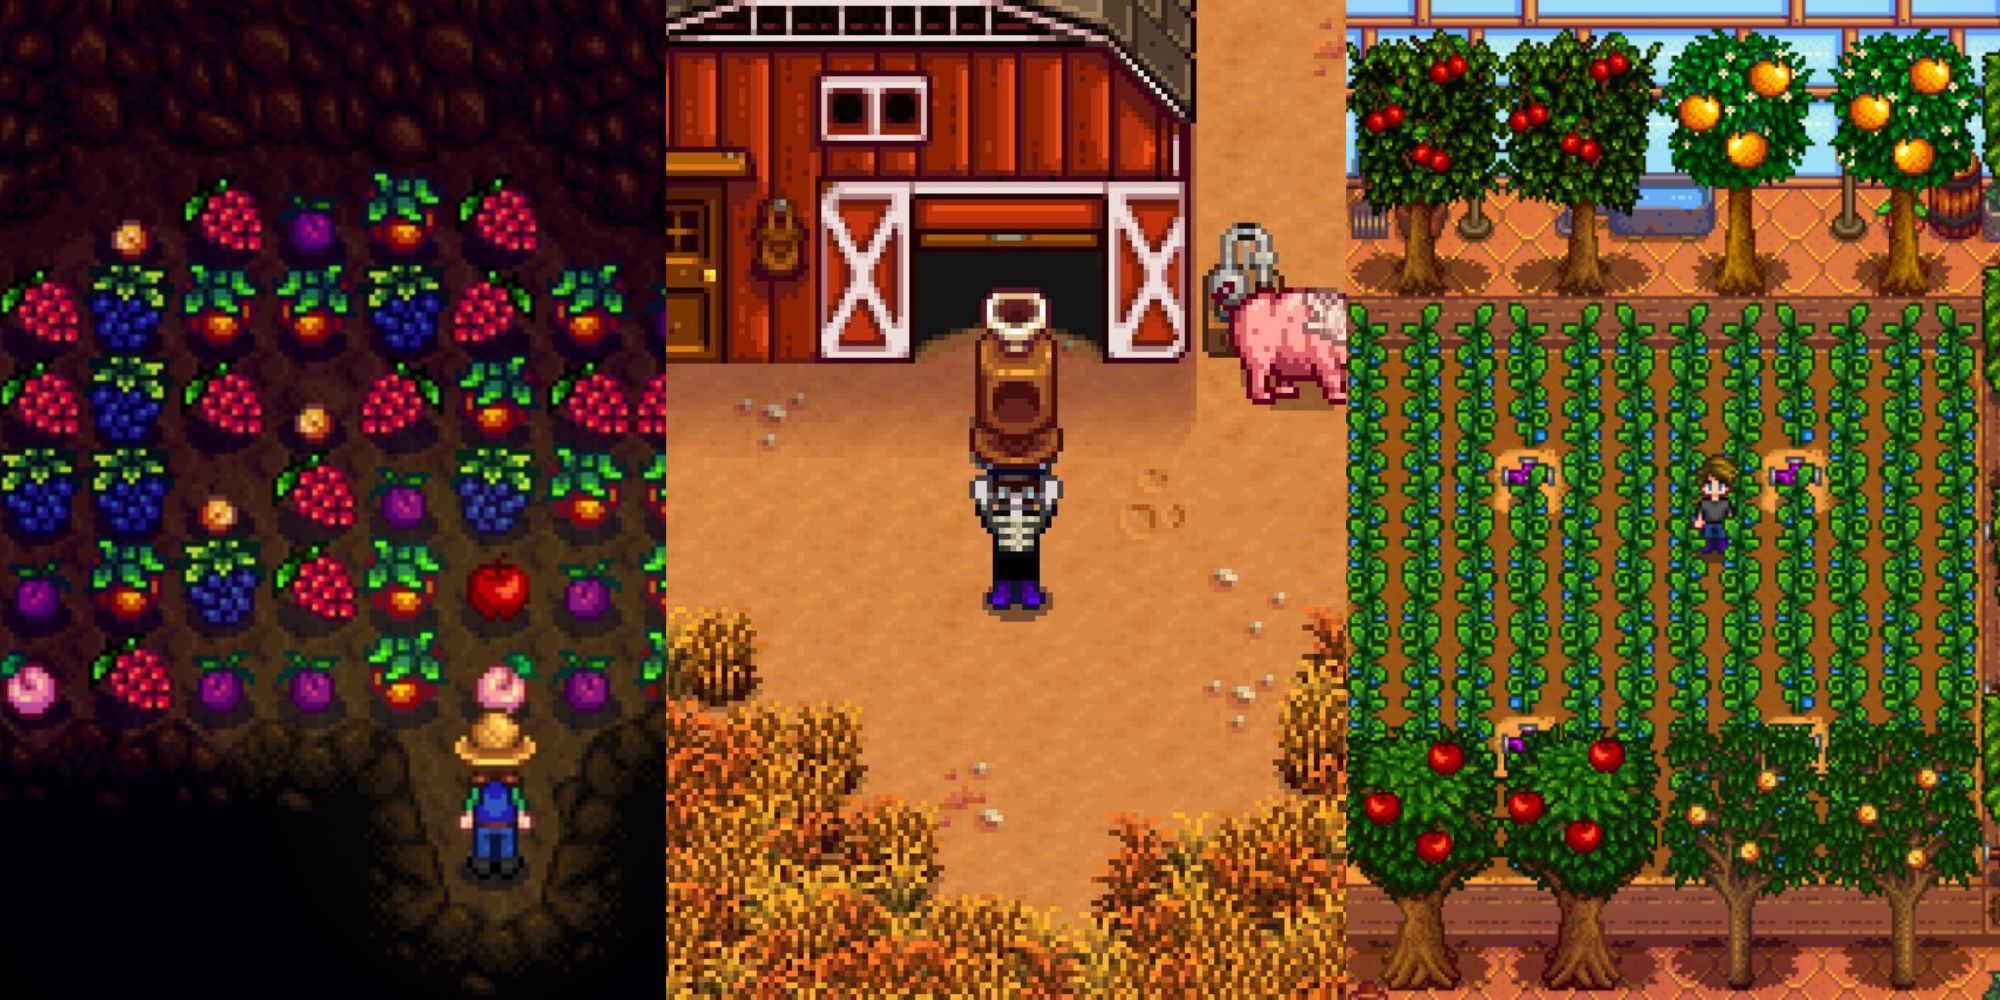 stardew valley automation hacks including the fruit cave, auto-grabber, and fruit trees